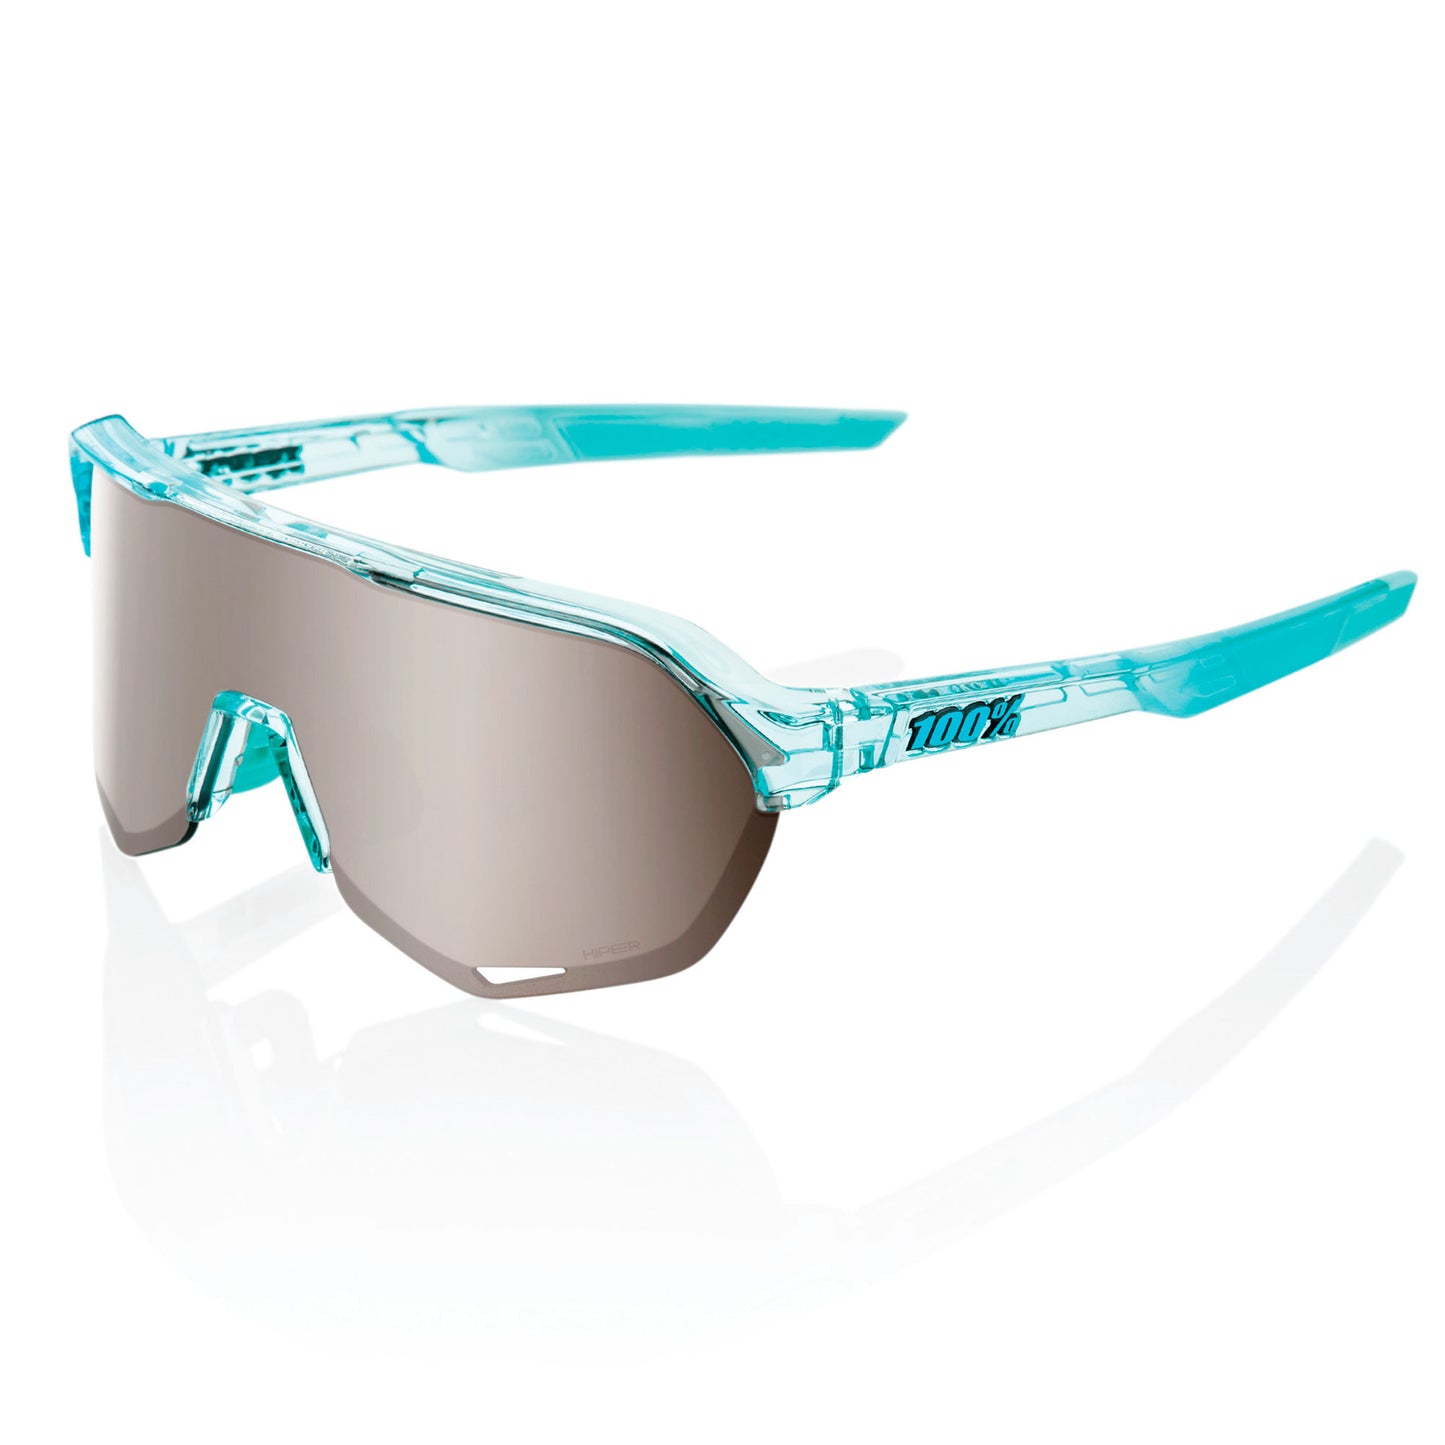 100% S2 Cycling Sunglasses - Polished Translucent Mint with HiPER Silver Mirror Lens